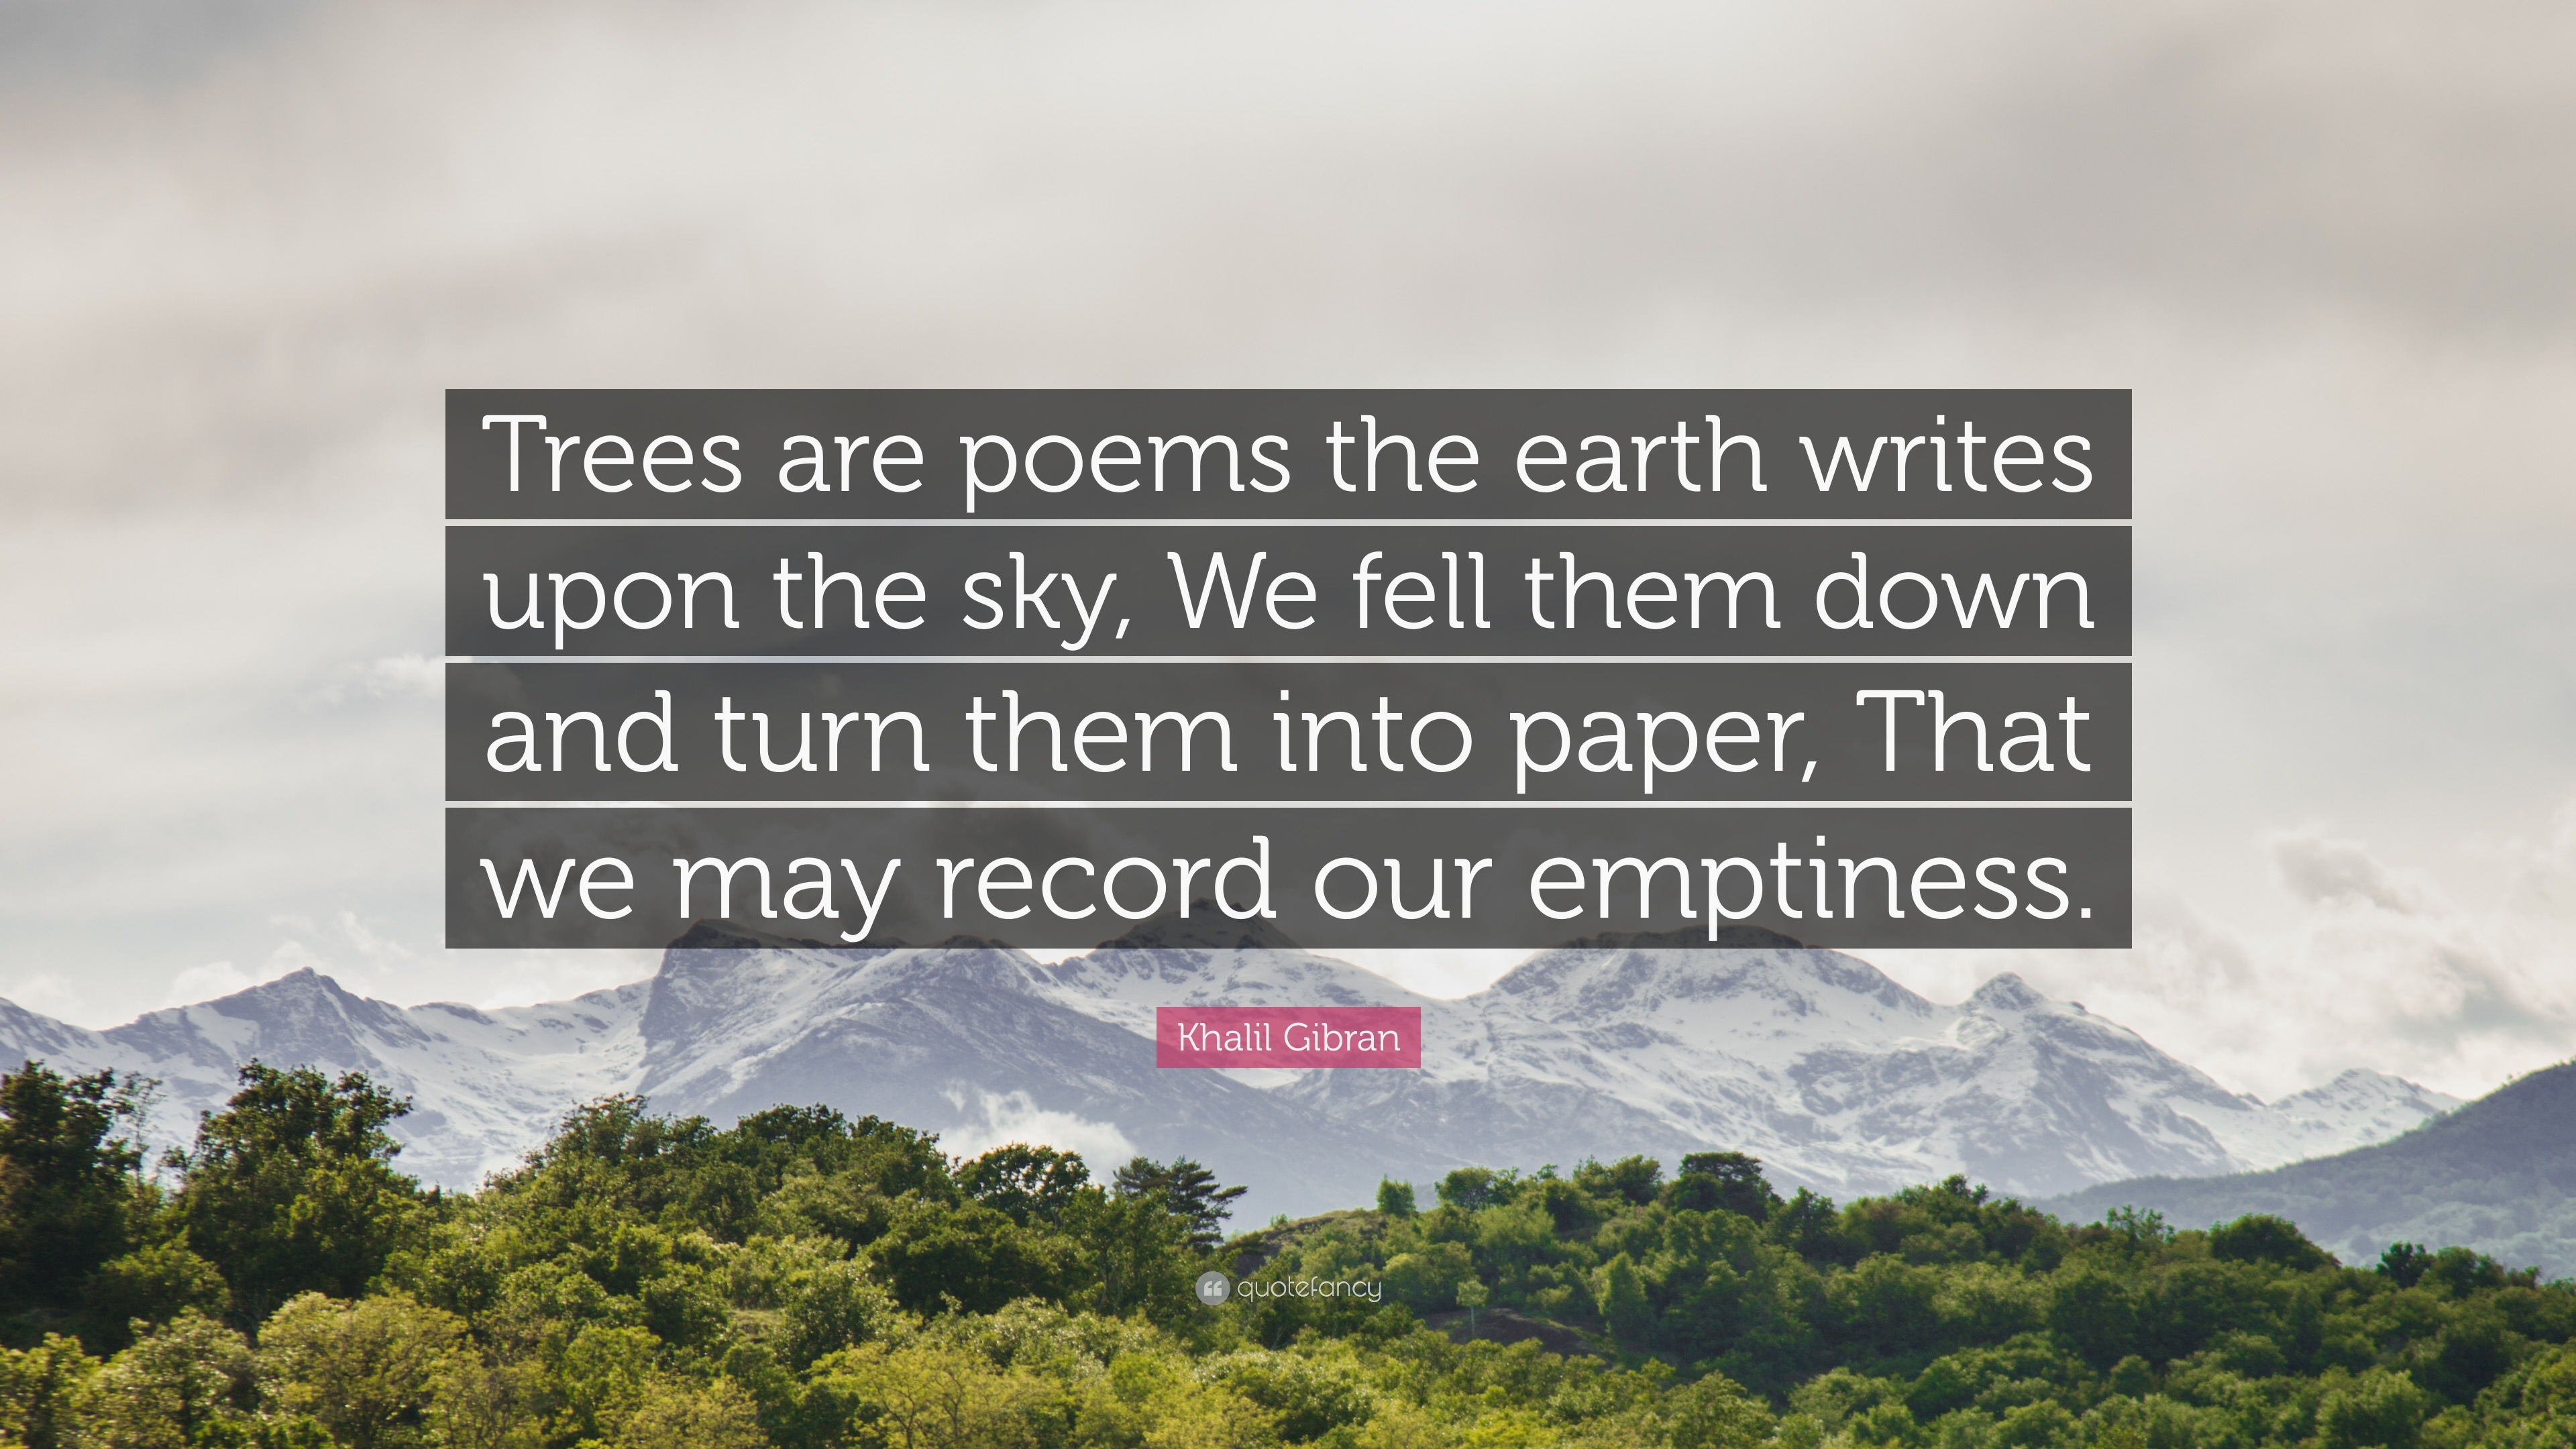 Khalil Gibran Quote: “Trees are poems the earth writes upon the